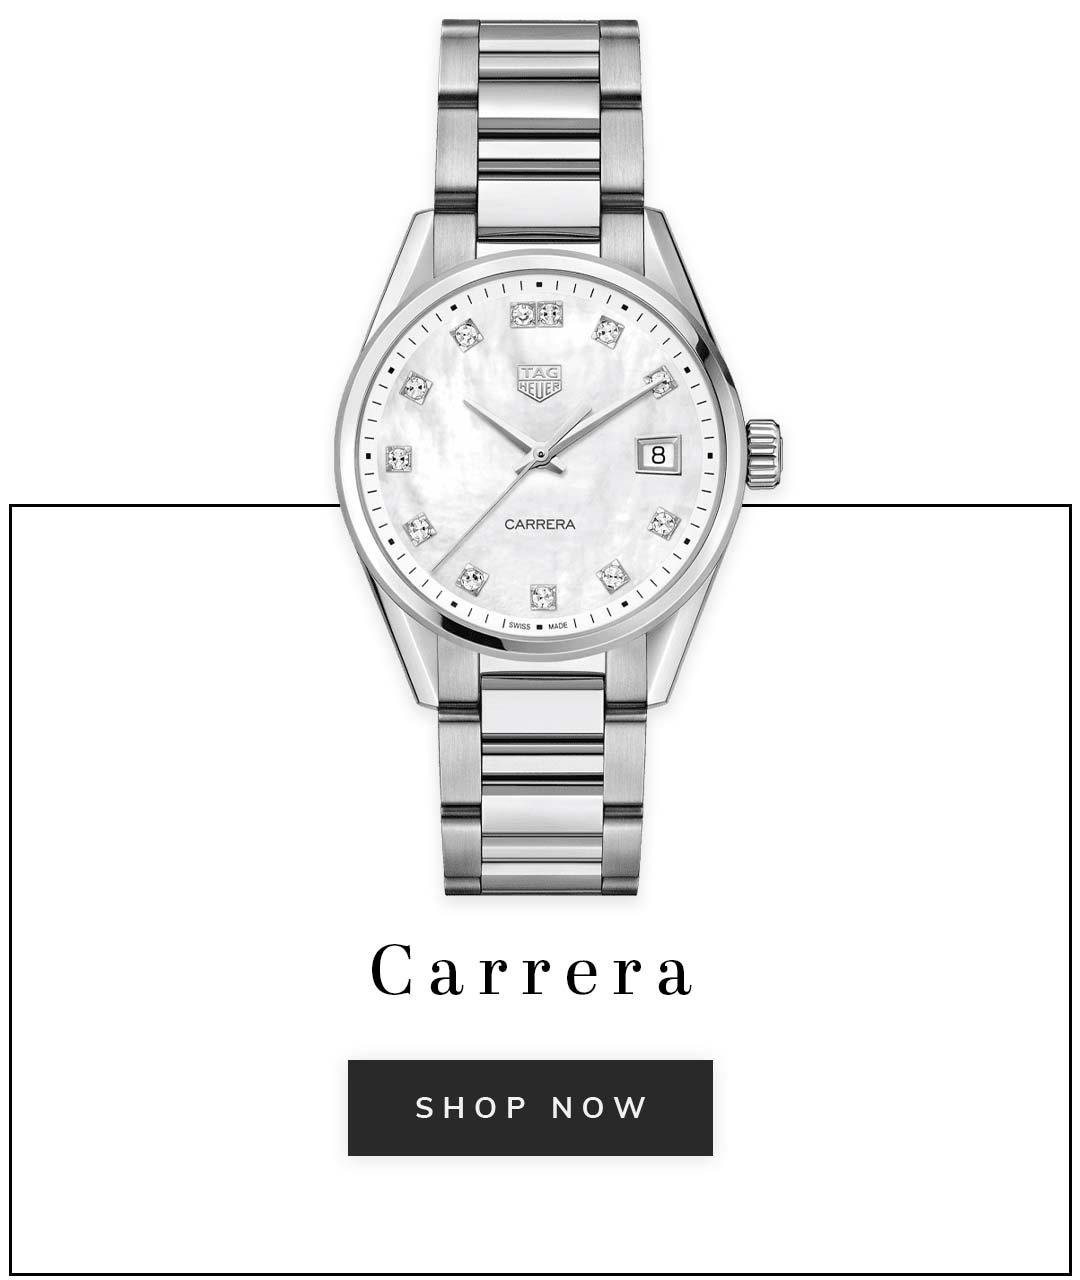 A TAG Heuer carrera watch with a silver dial and caption carrera shop now